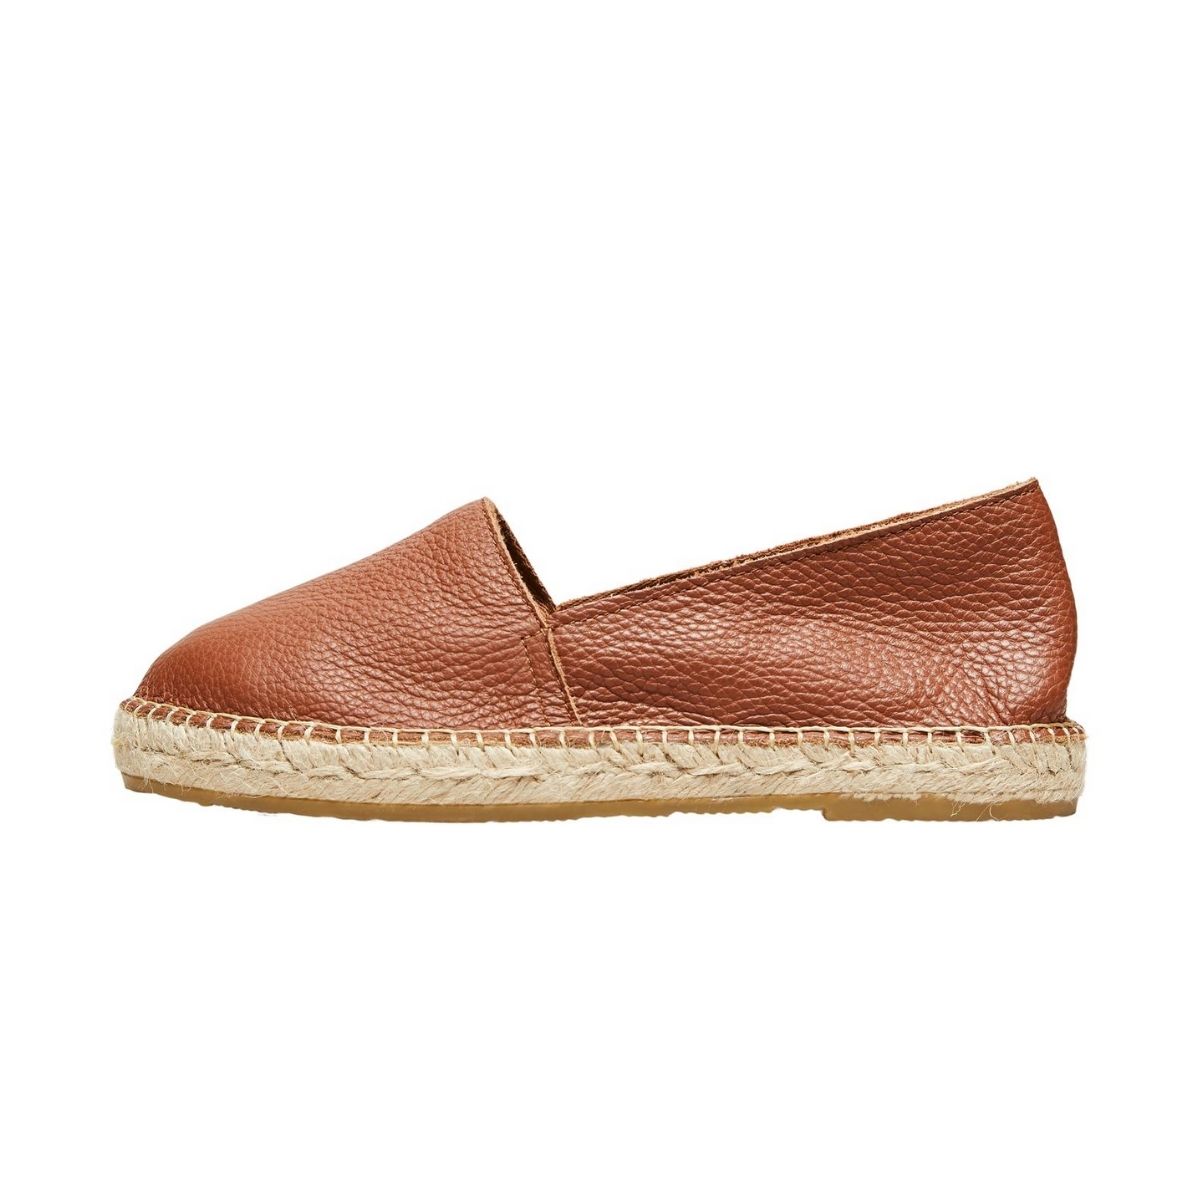 Selected Femme Leather Espadrilles 